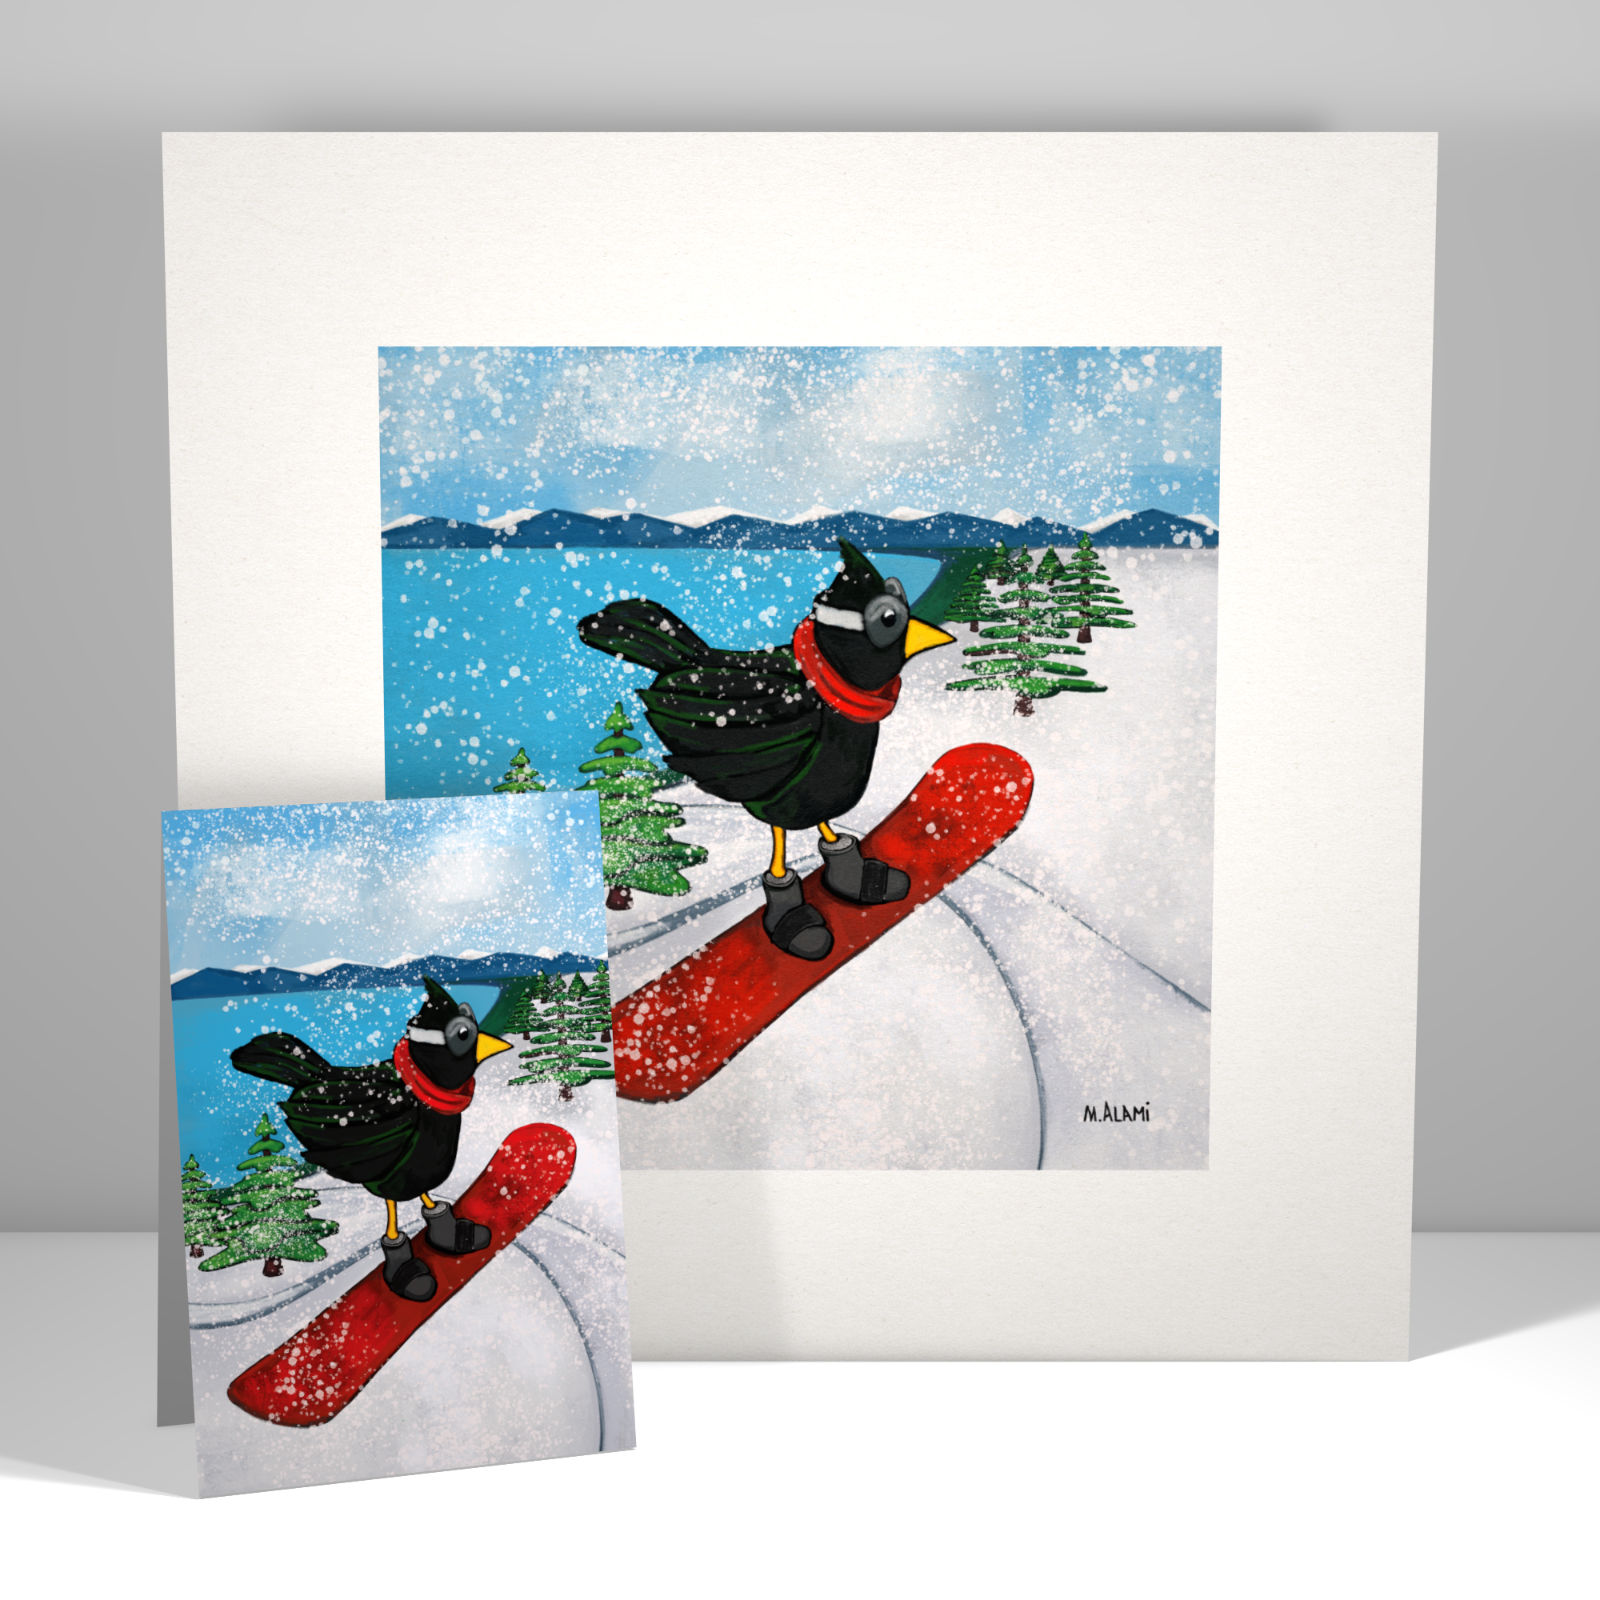 Painting of a Bird about to go snowboarding.